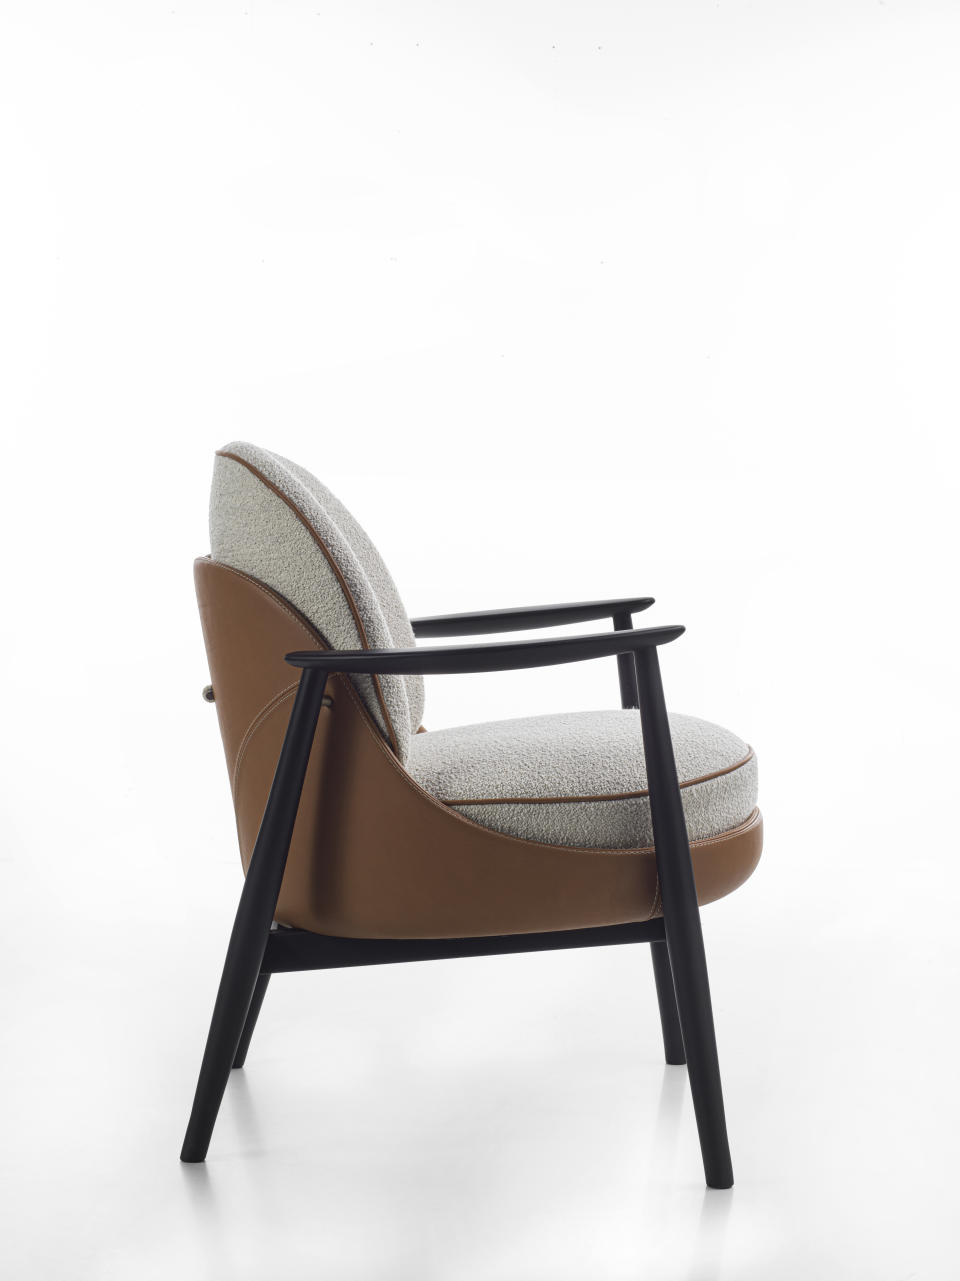 Milan Design Week Porada Ginkgo accent chair in wood, leather and grey seat